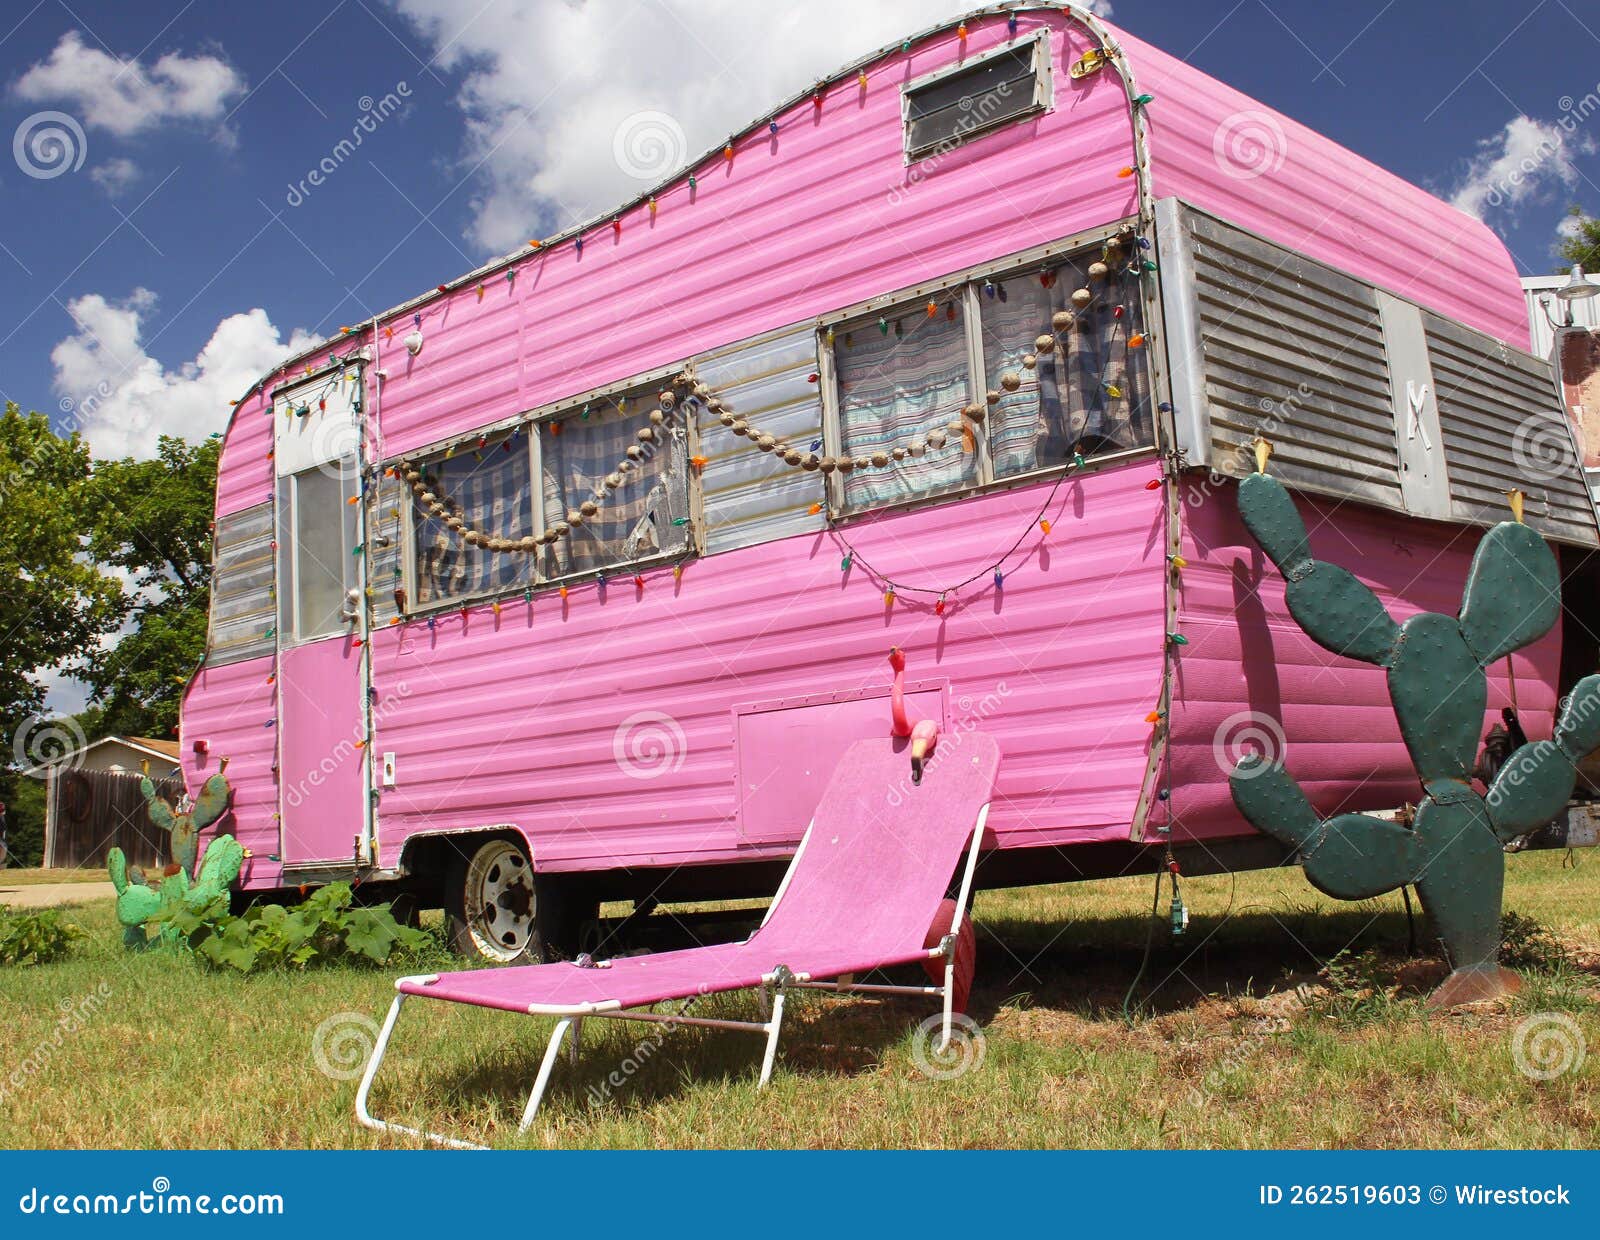 cute pink travel trailer under a bright cloudy sky with cacti and trees around a tumbona chair